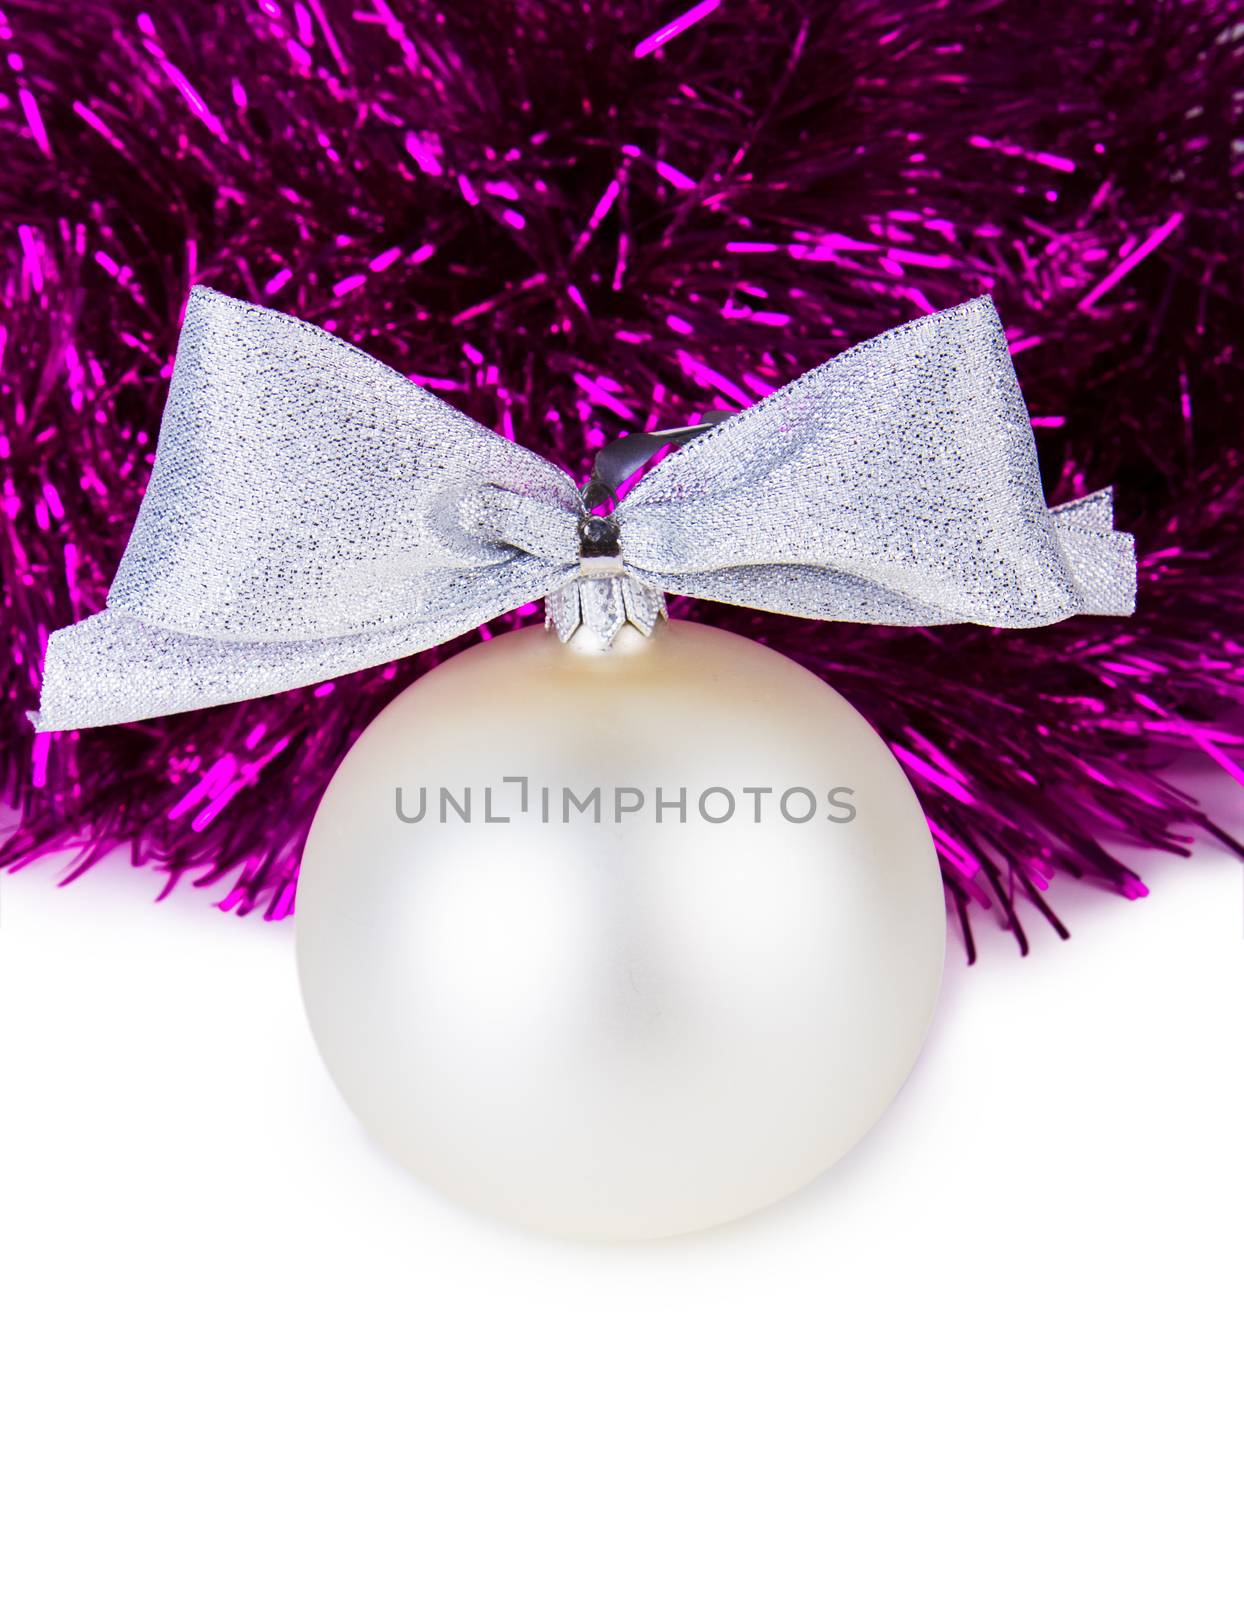 Purple Christmas balls isolated on a white background